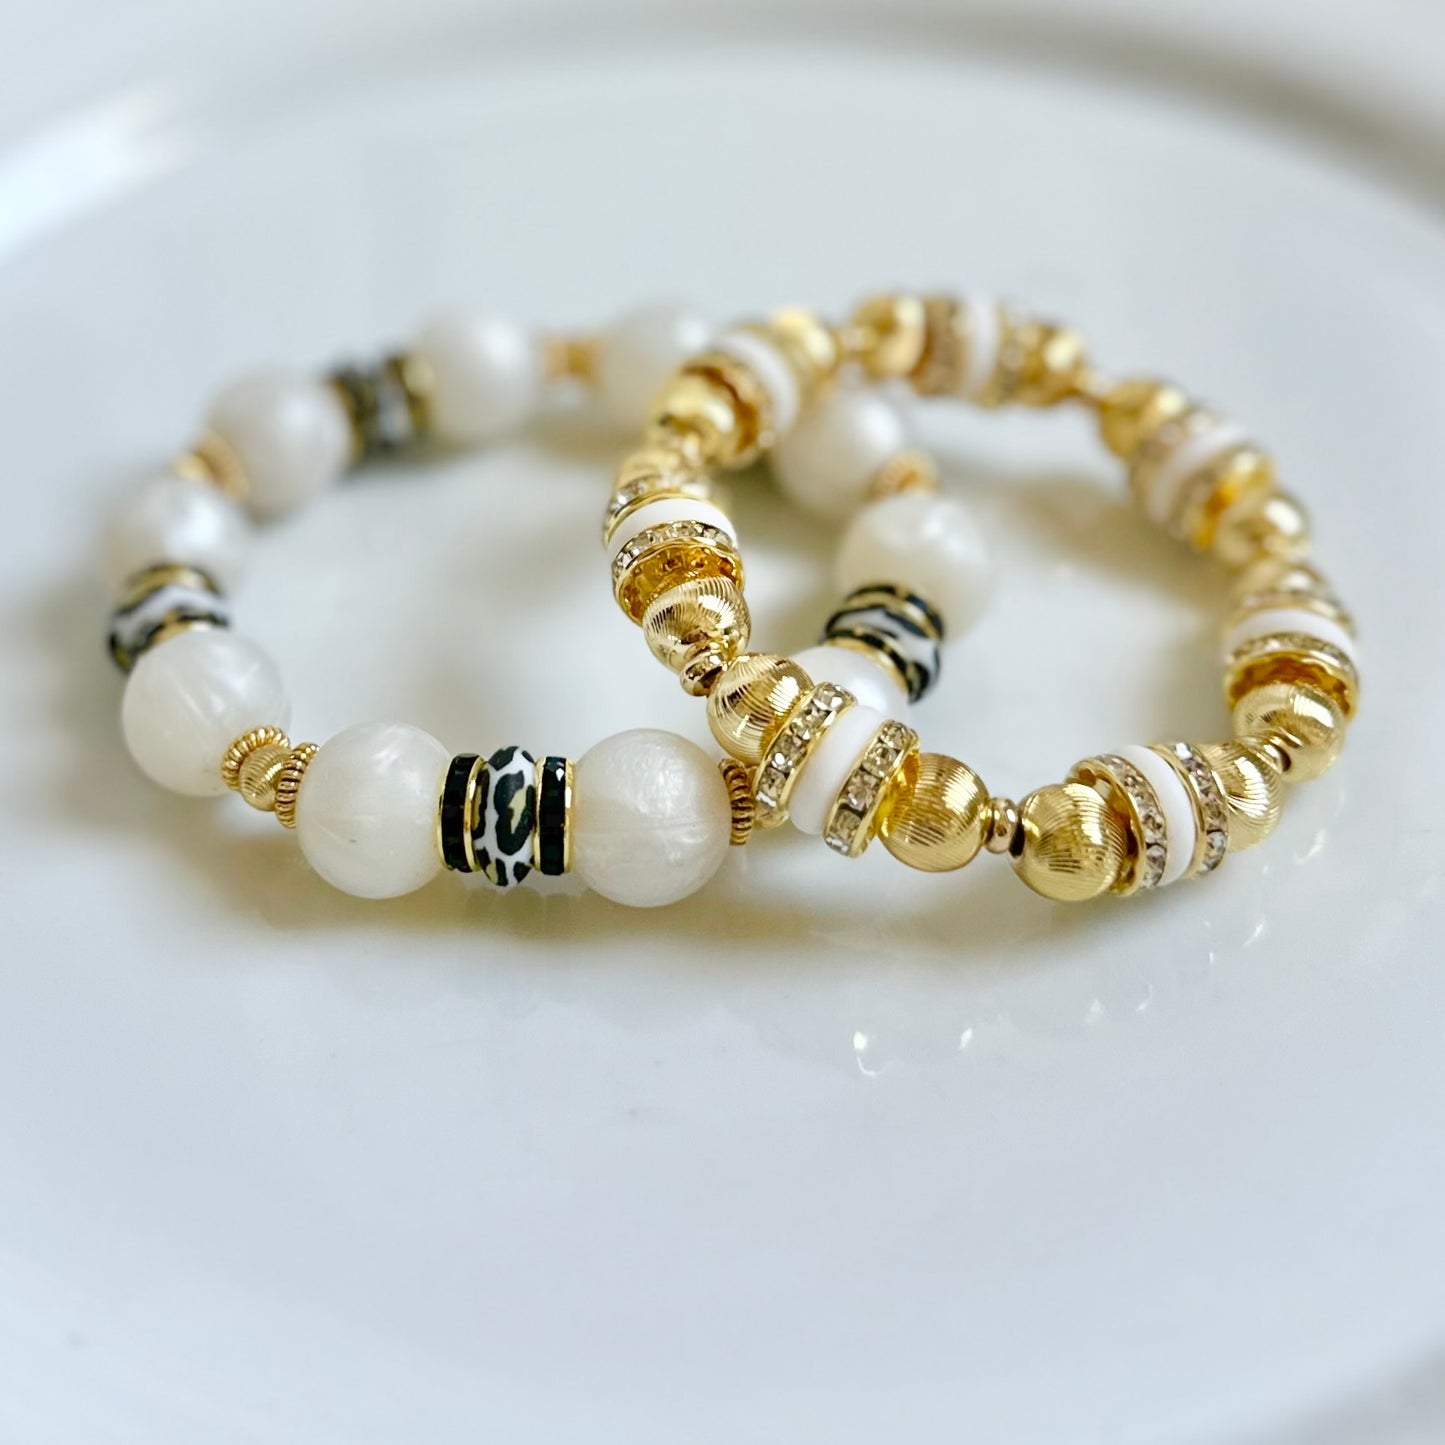 GOLD AND WHITE BRACELET WITH CZ ACCENTS